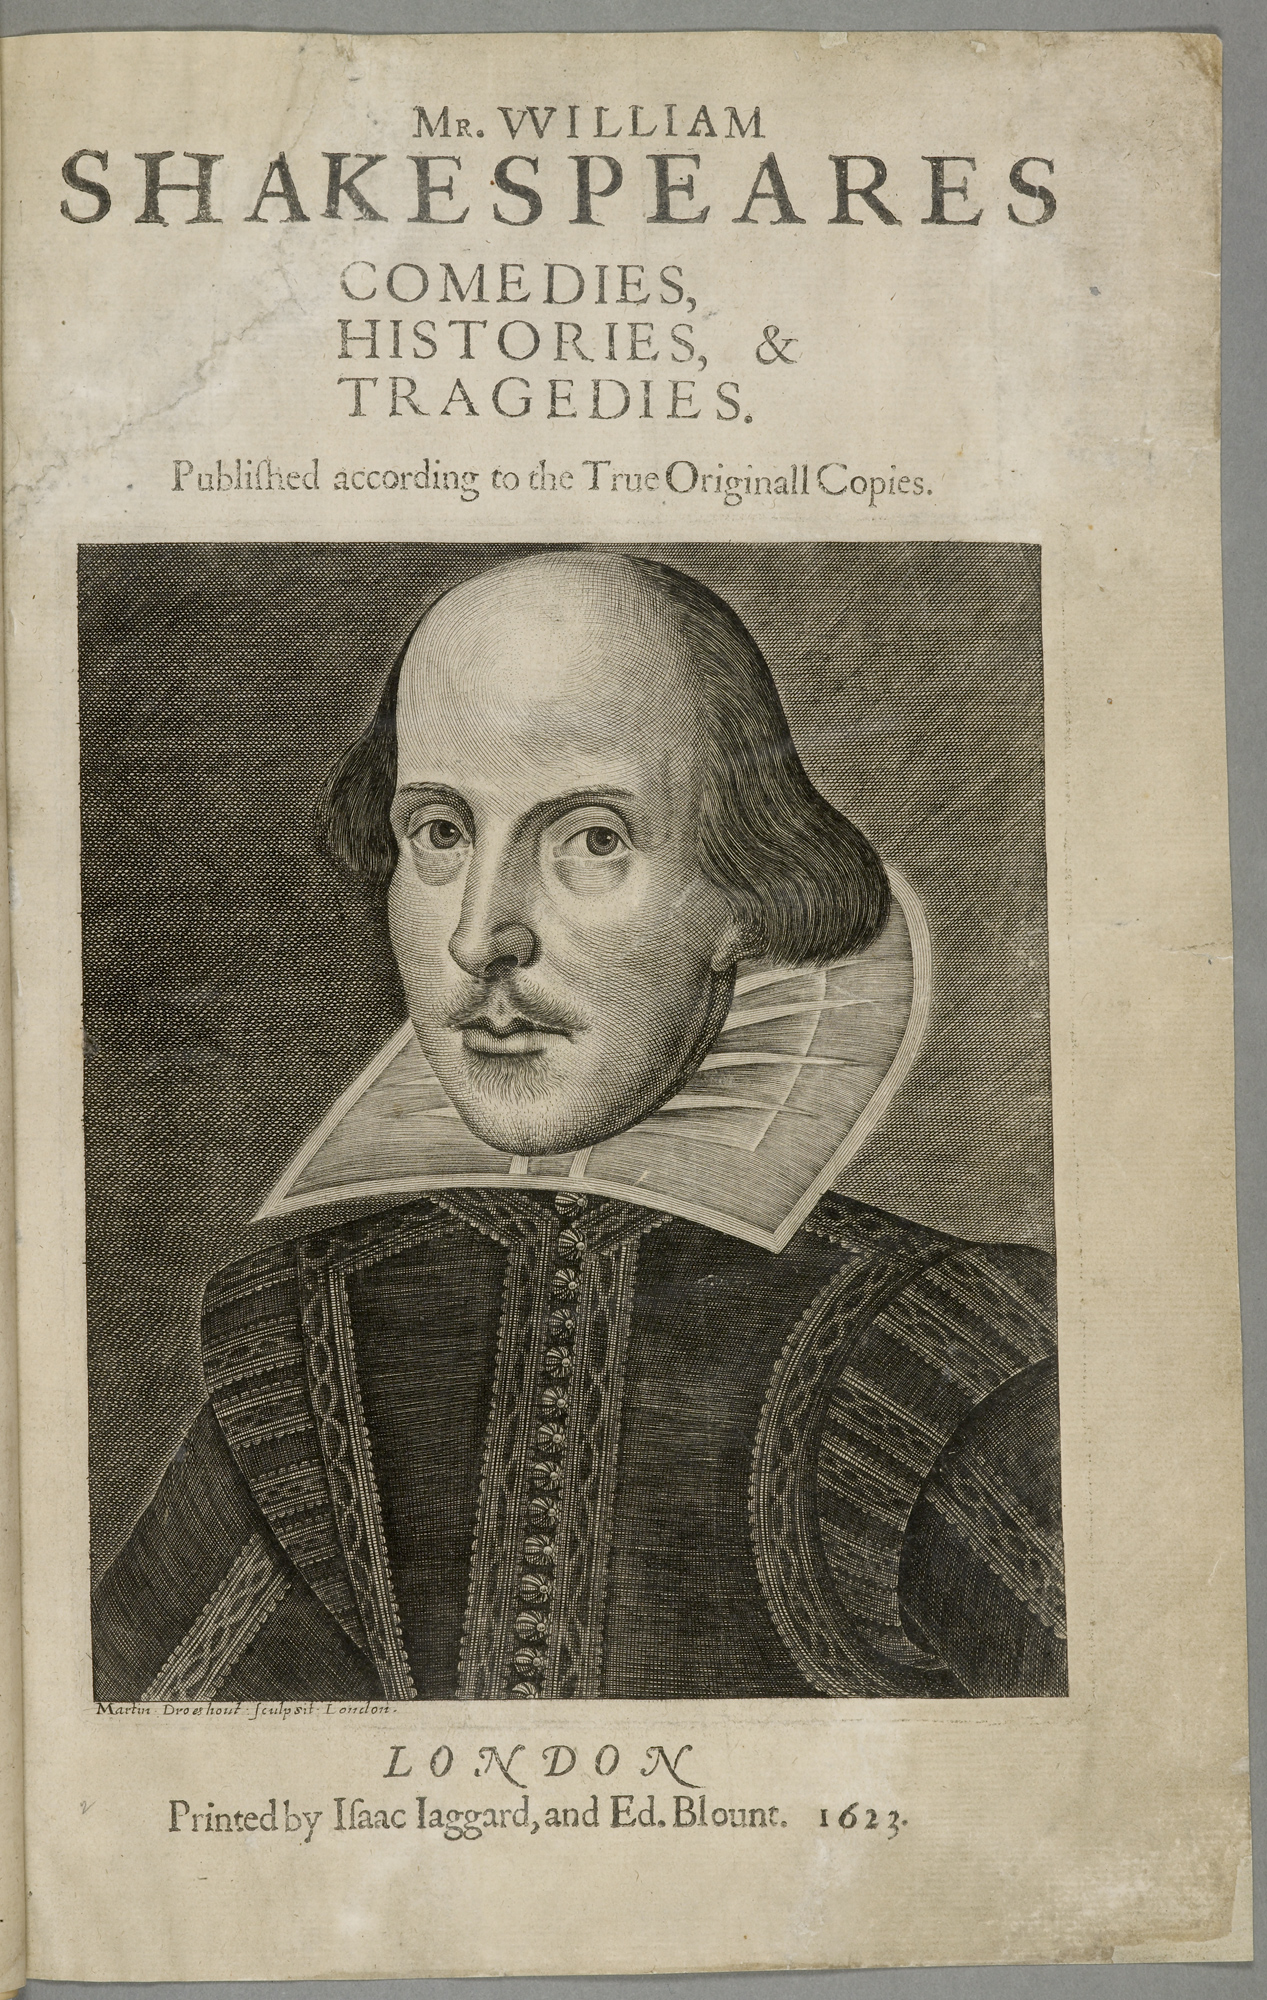 title page of the first Folio edition of Shakespeare's plays, 1623